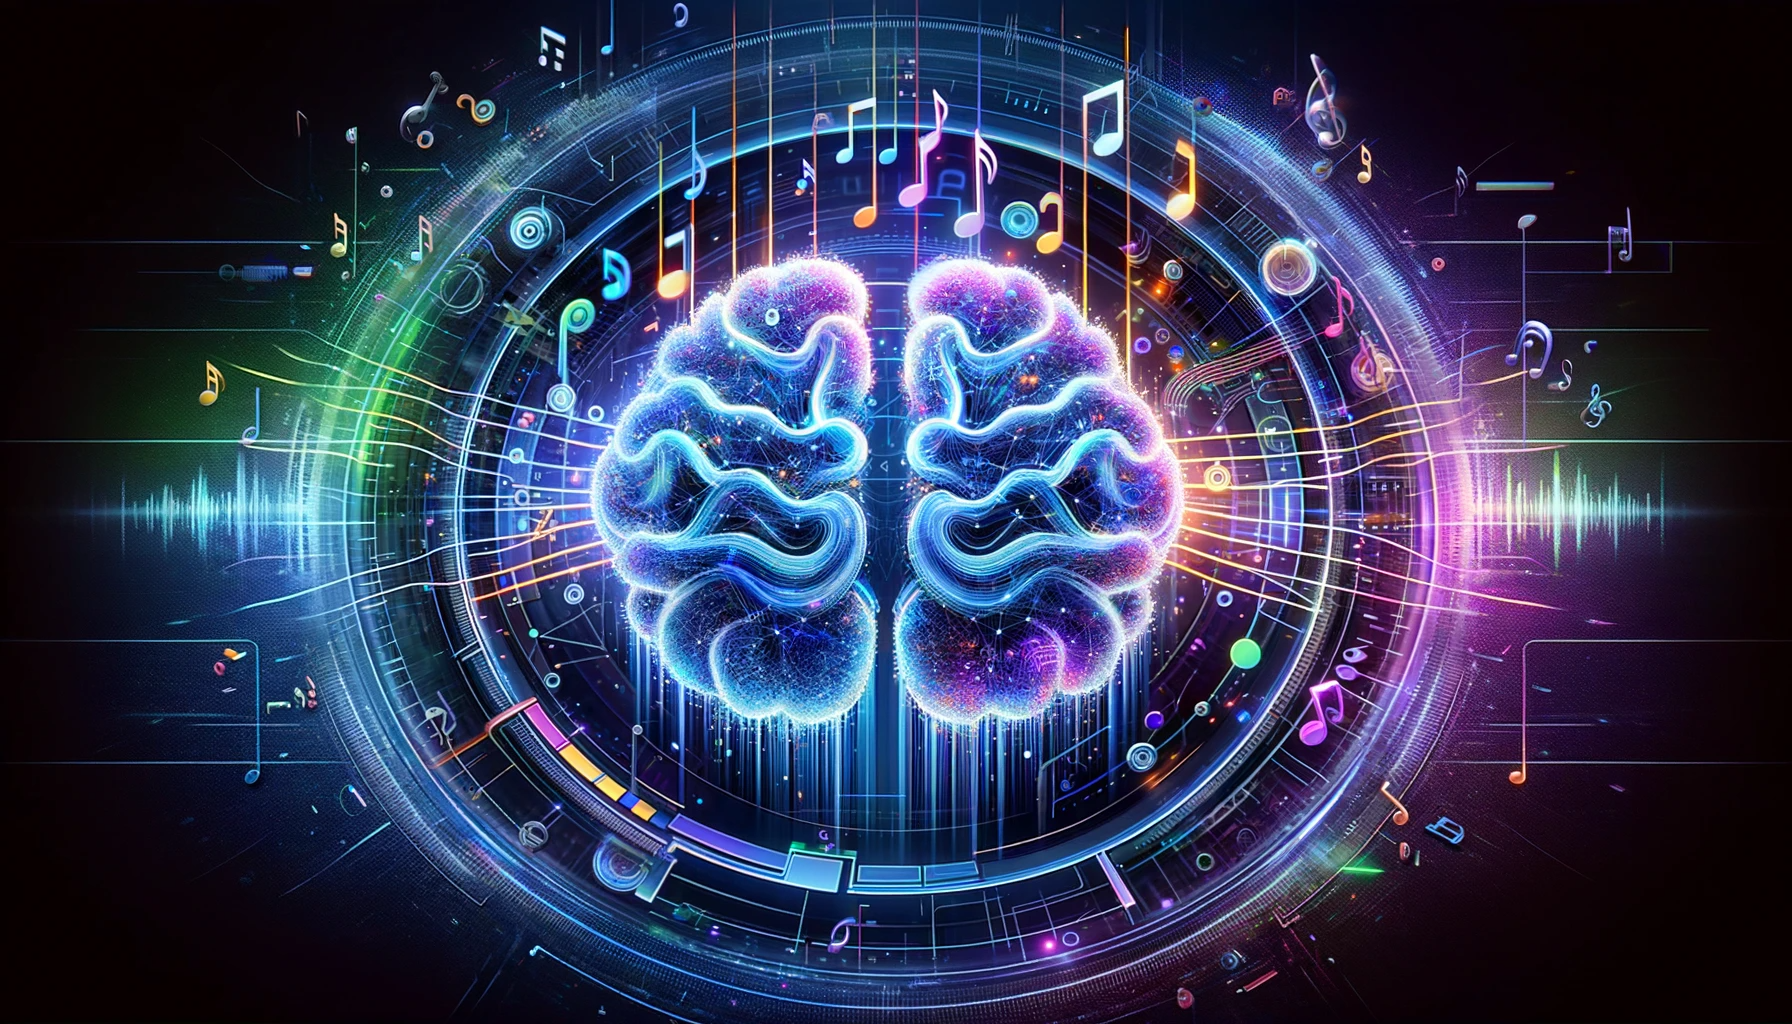 Google’s latest artificial intelligence innovation, ‘MusicFX’, creates music compositions using only a handful of words.